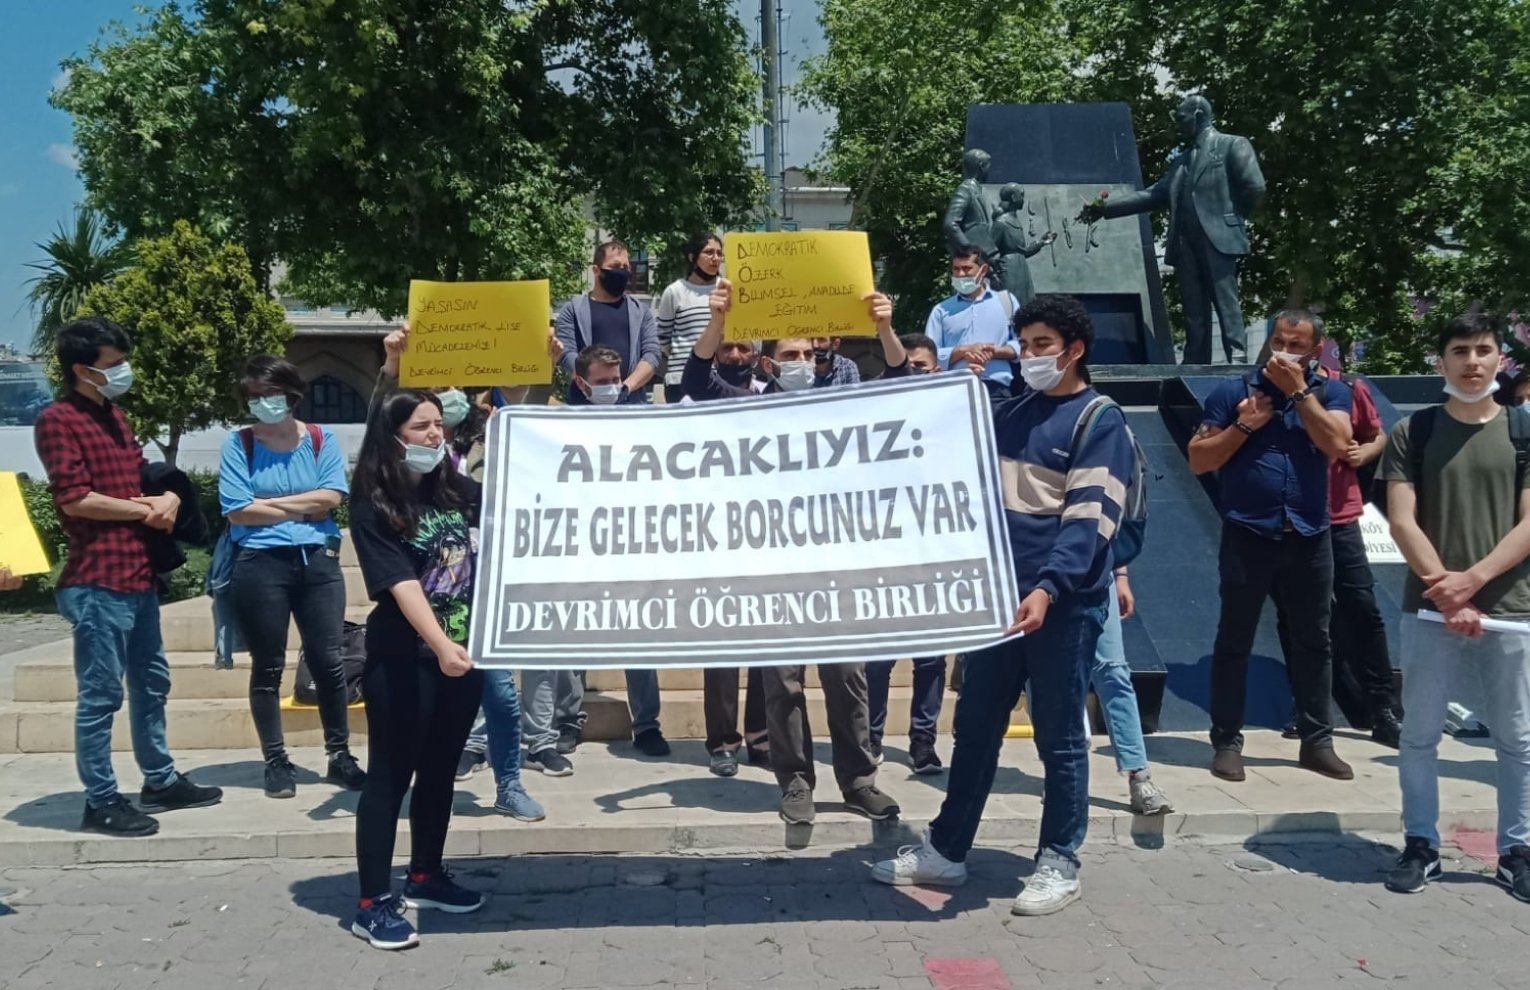 ‘You owe us a future,’ say high school students in Turkey